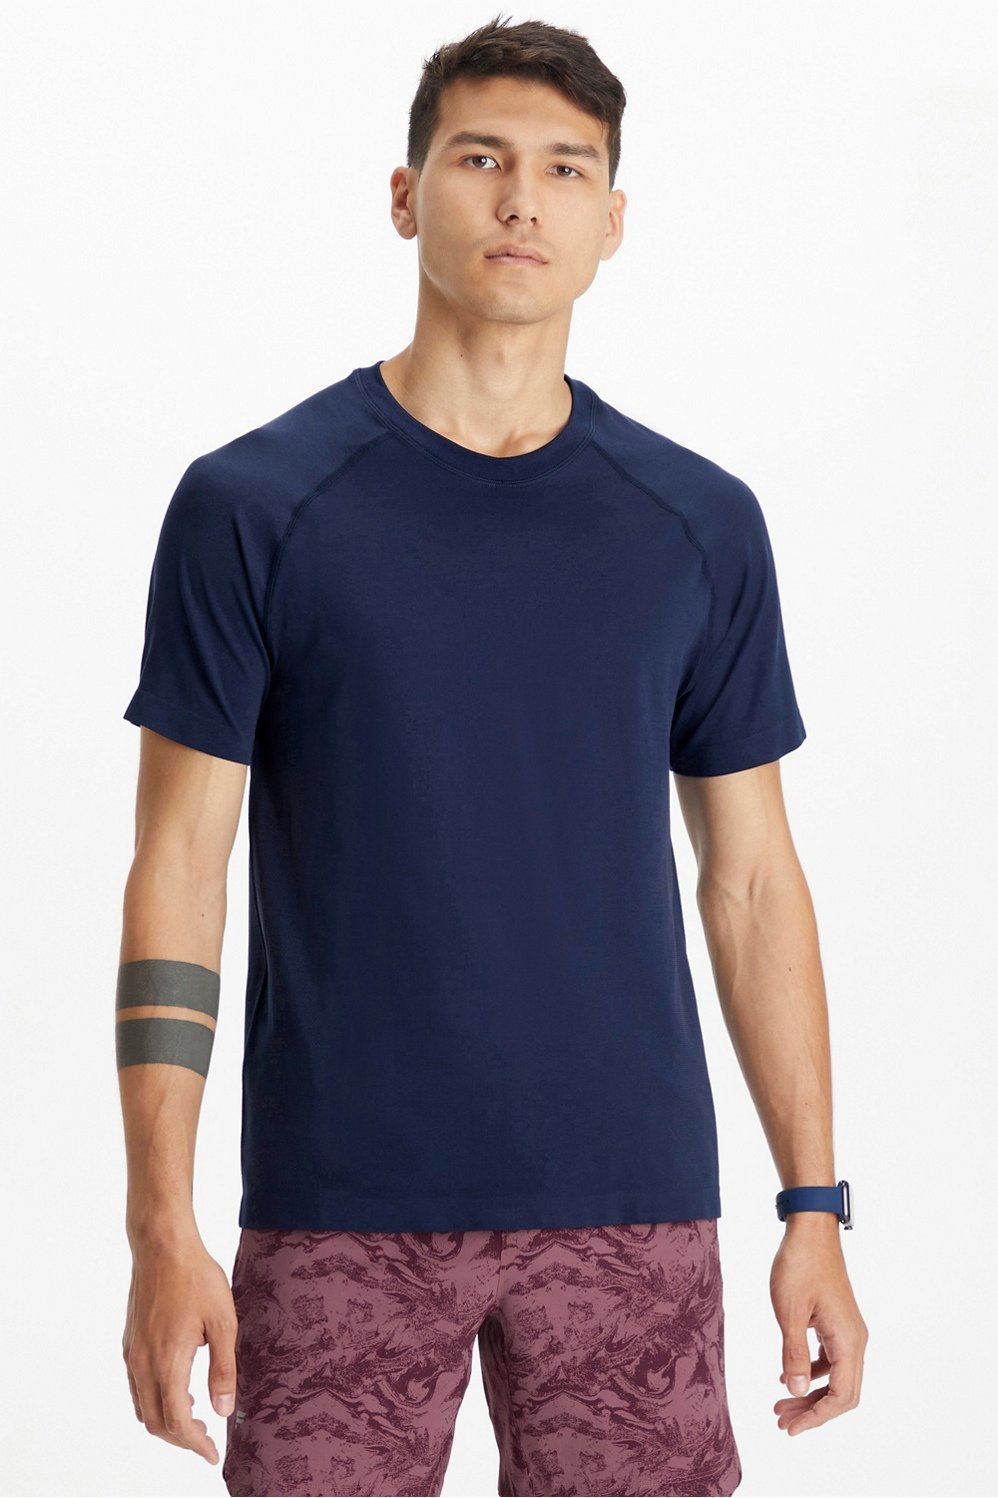 TOUGH MUDDER by Fabletics The Training Day Tee - Men's